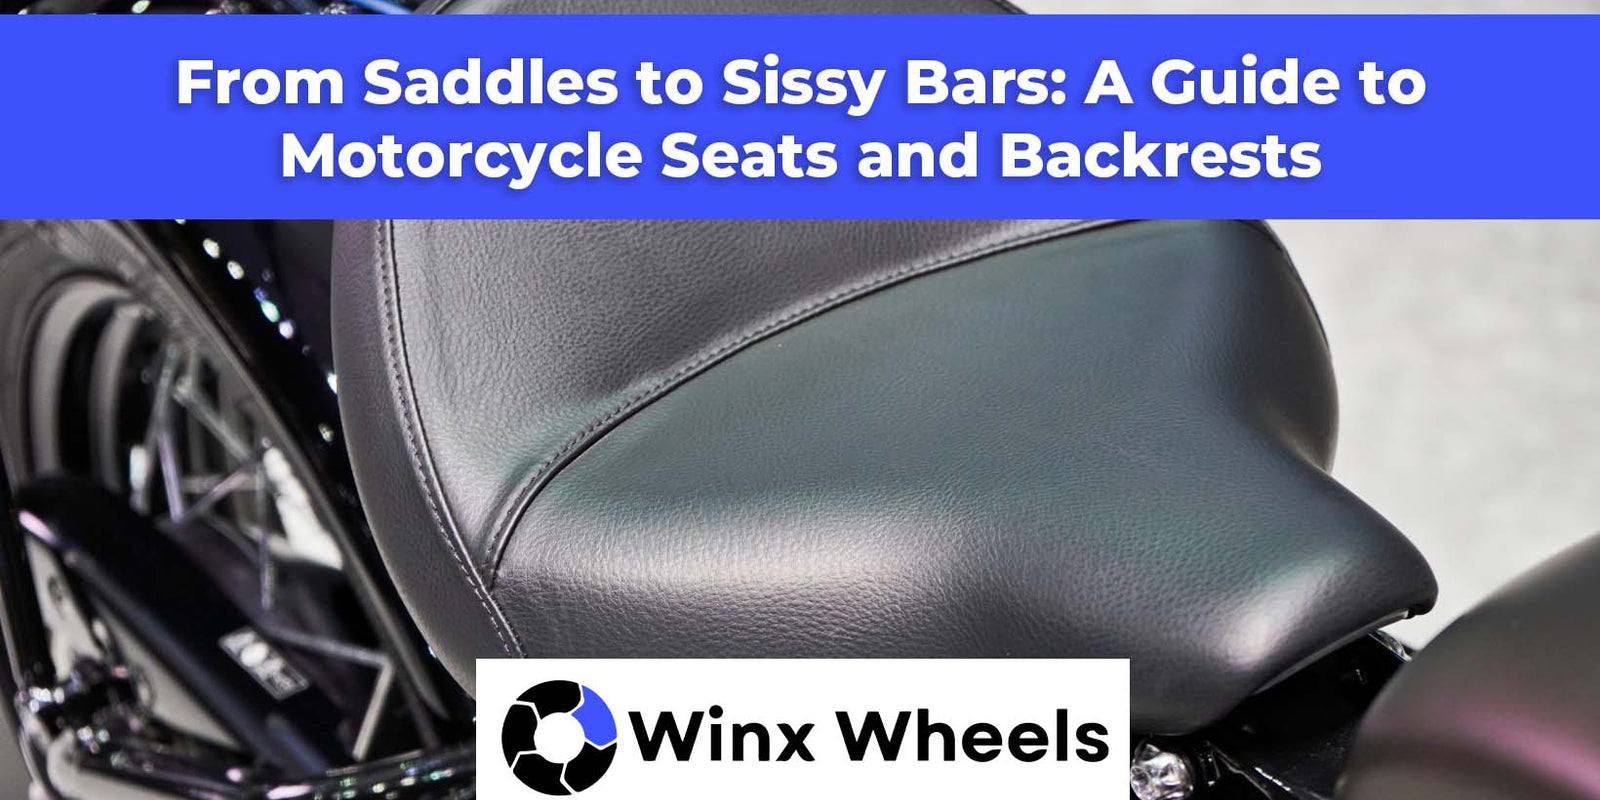 From Saddles to Sissy Bars: A Guide to Motorcycle Seats and Backrests